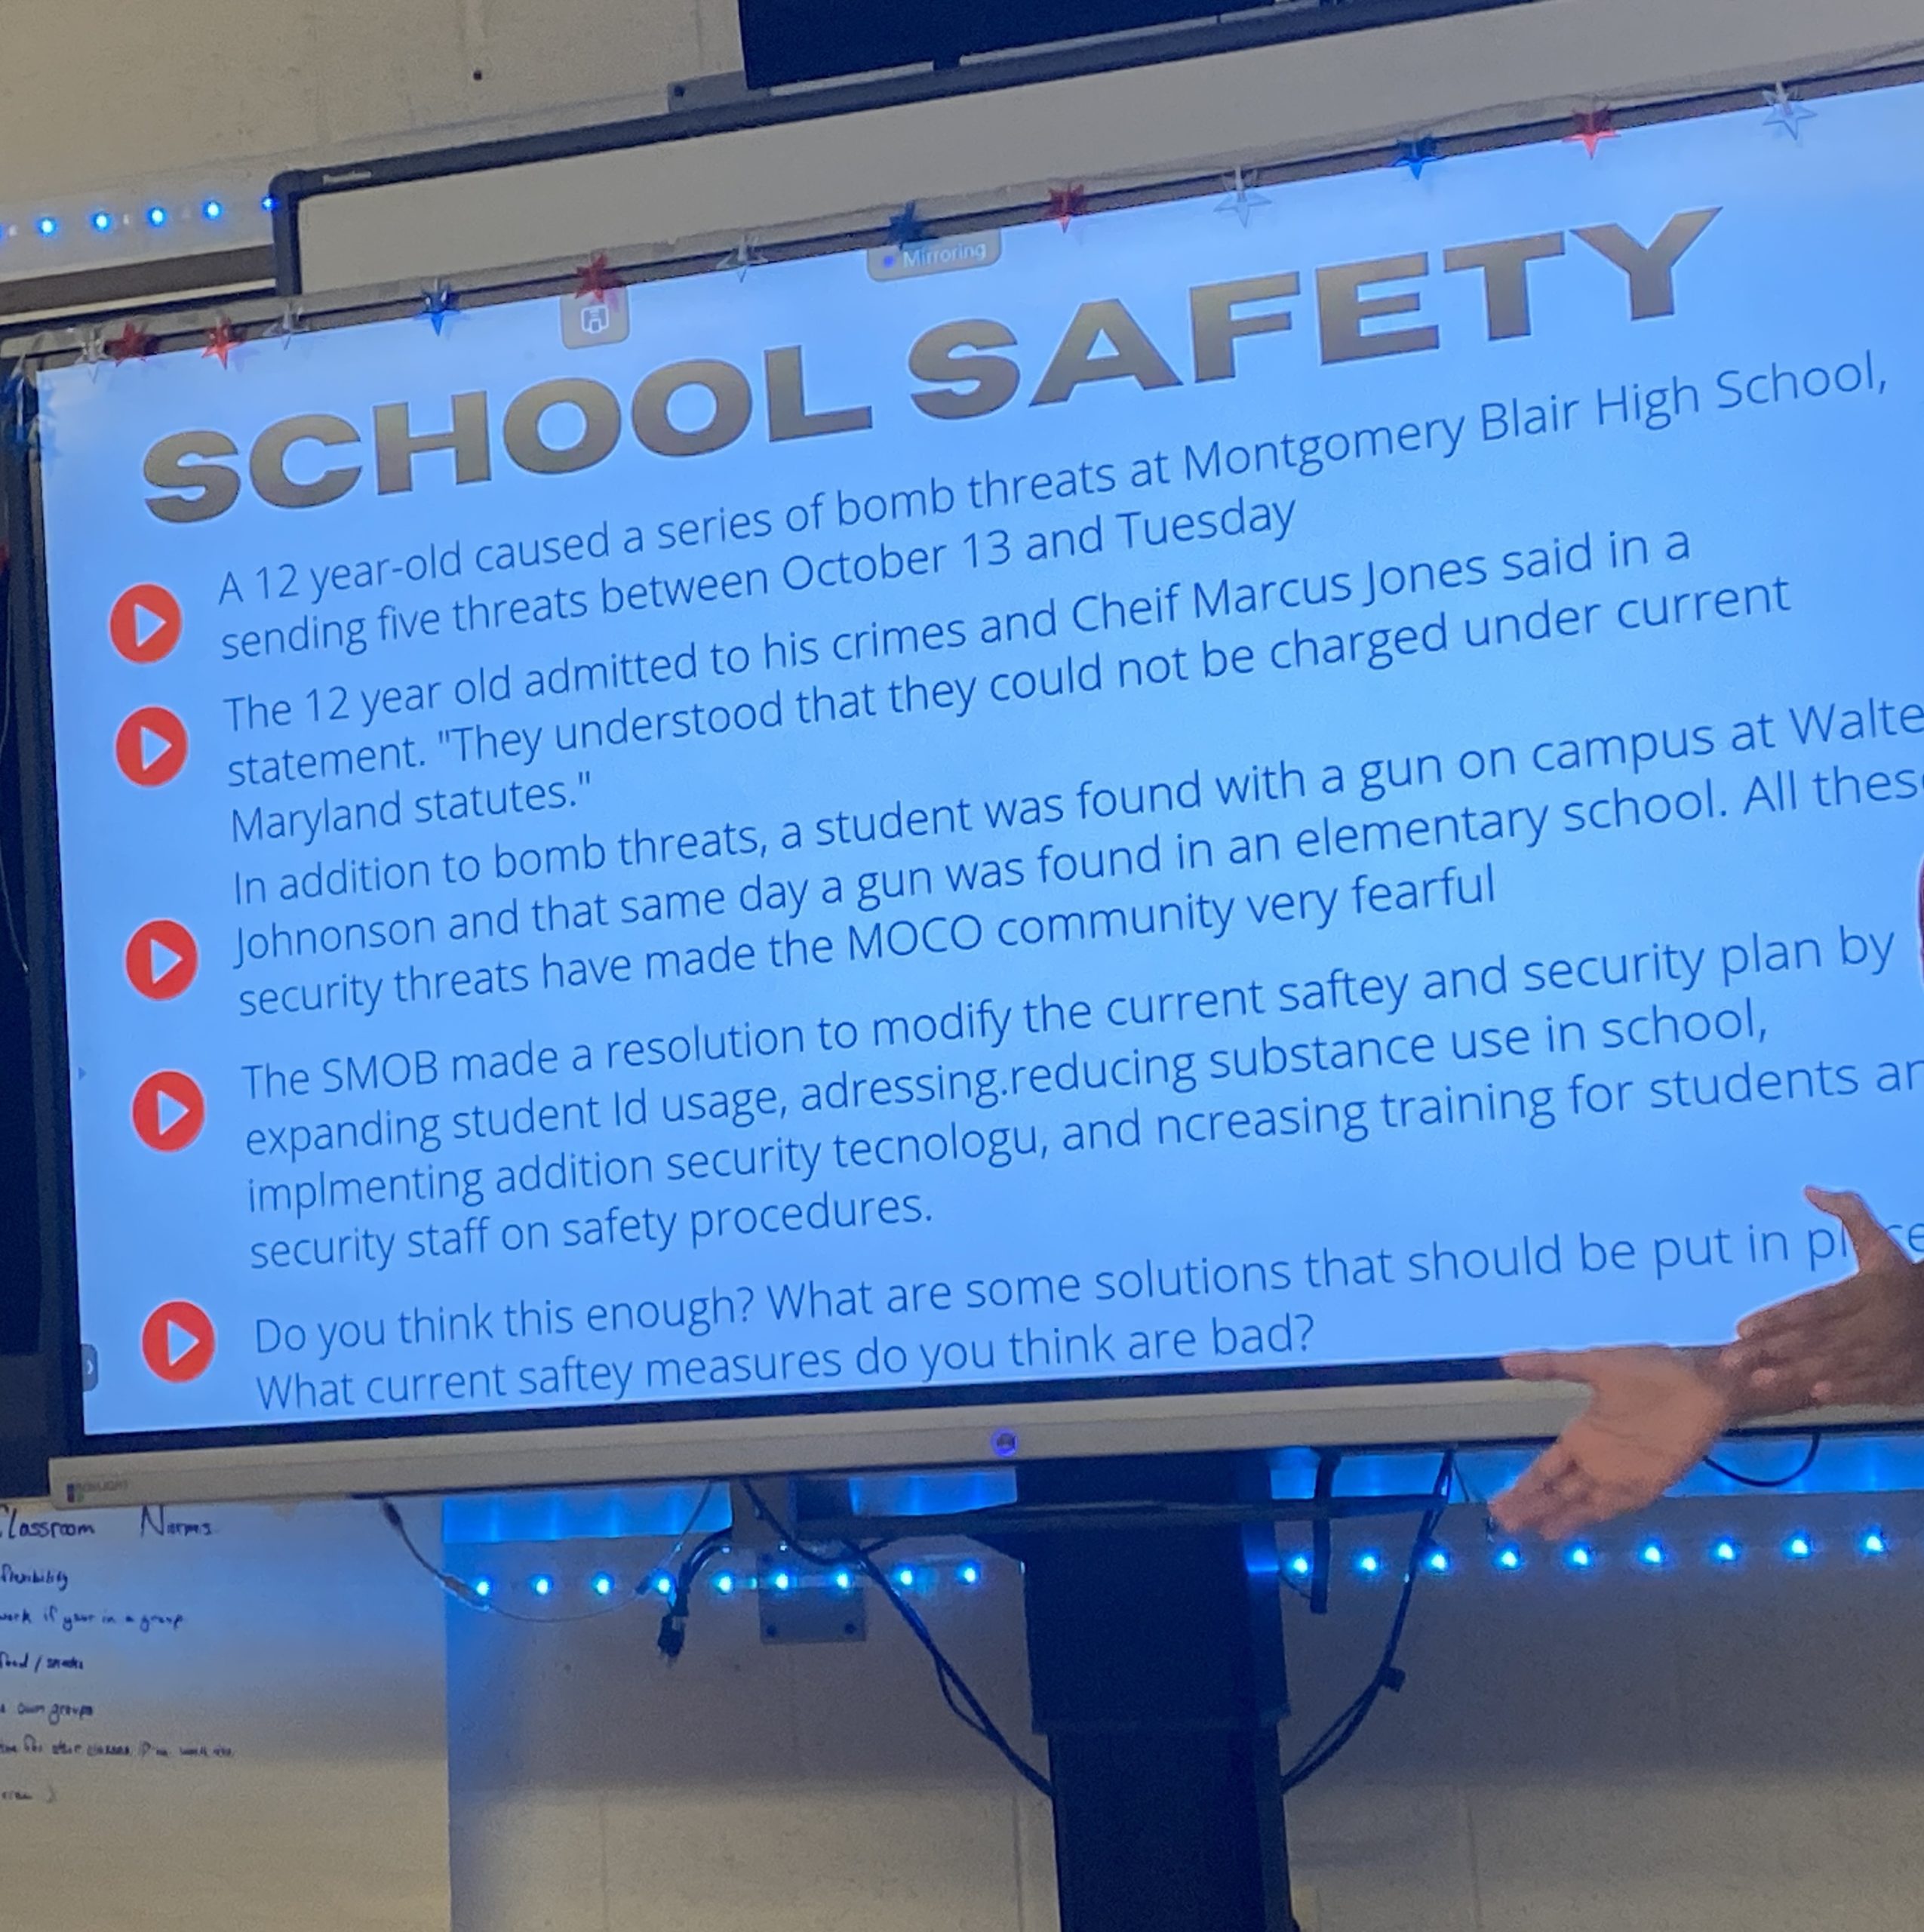 The Activist Club discusses school safety and how MCPS can keep students safe.